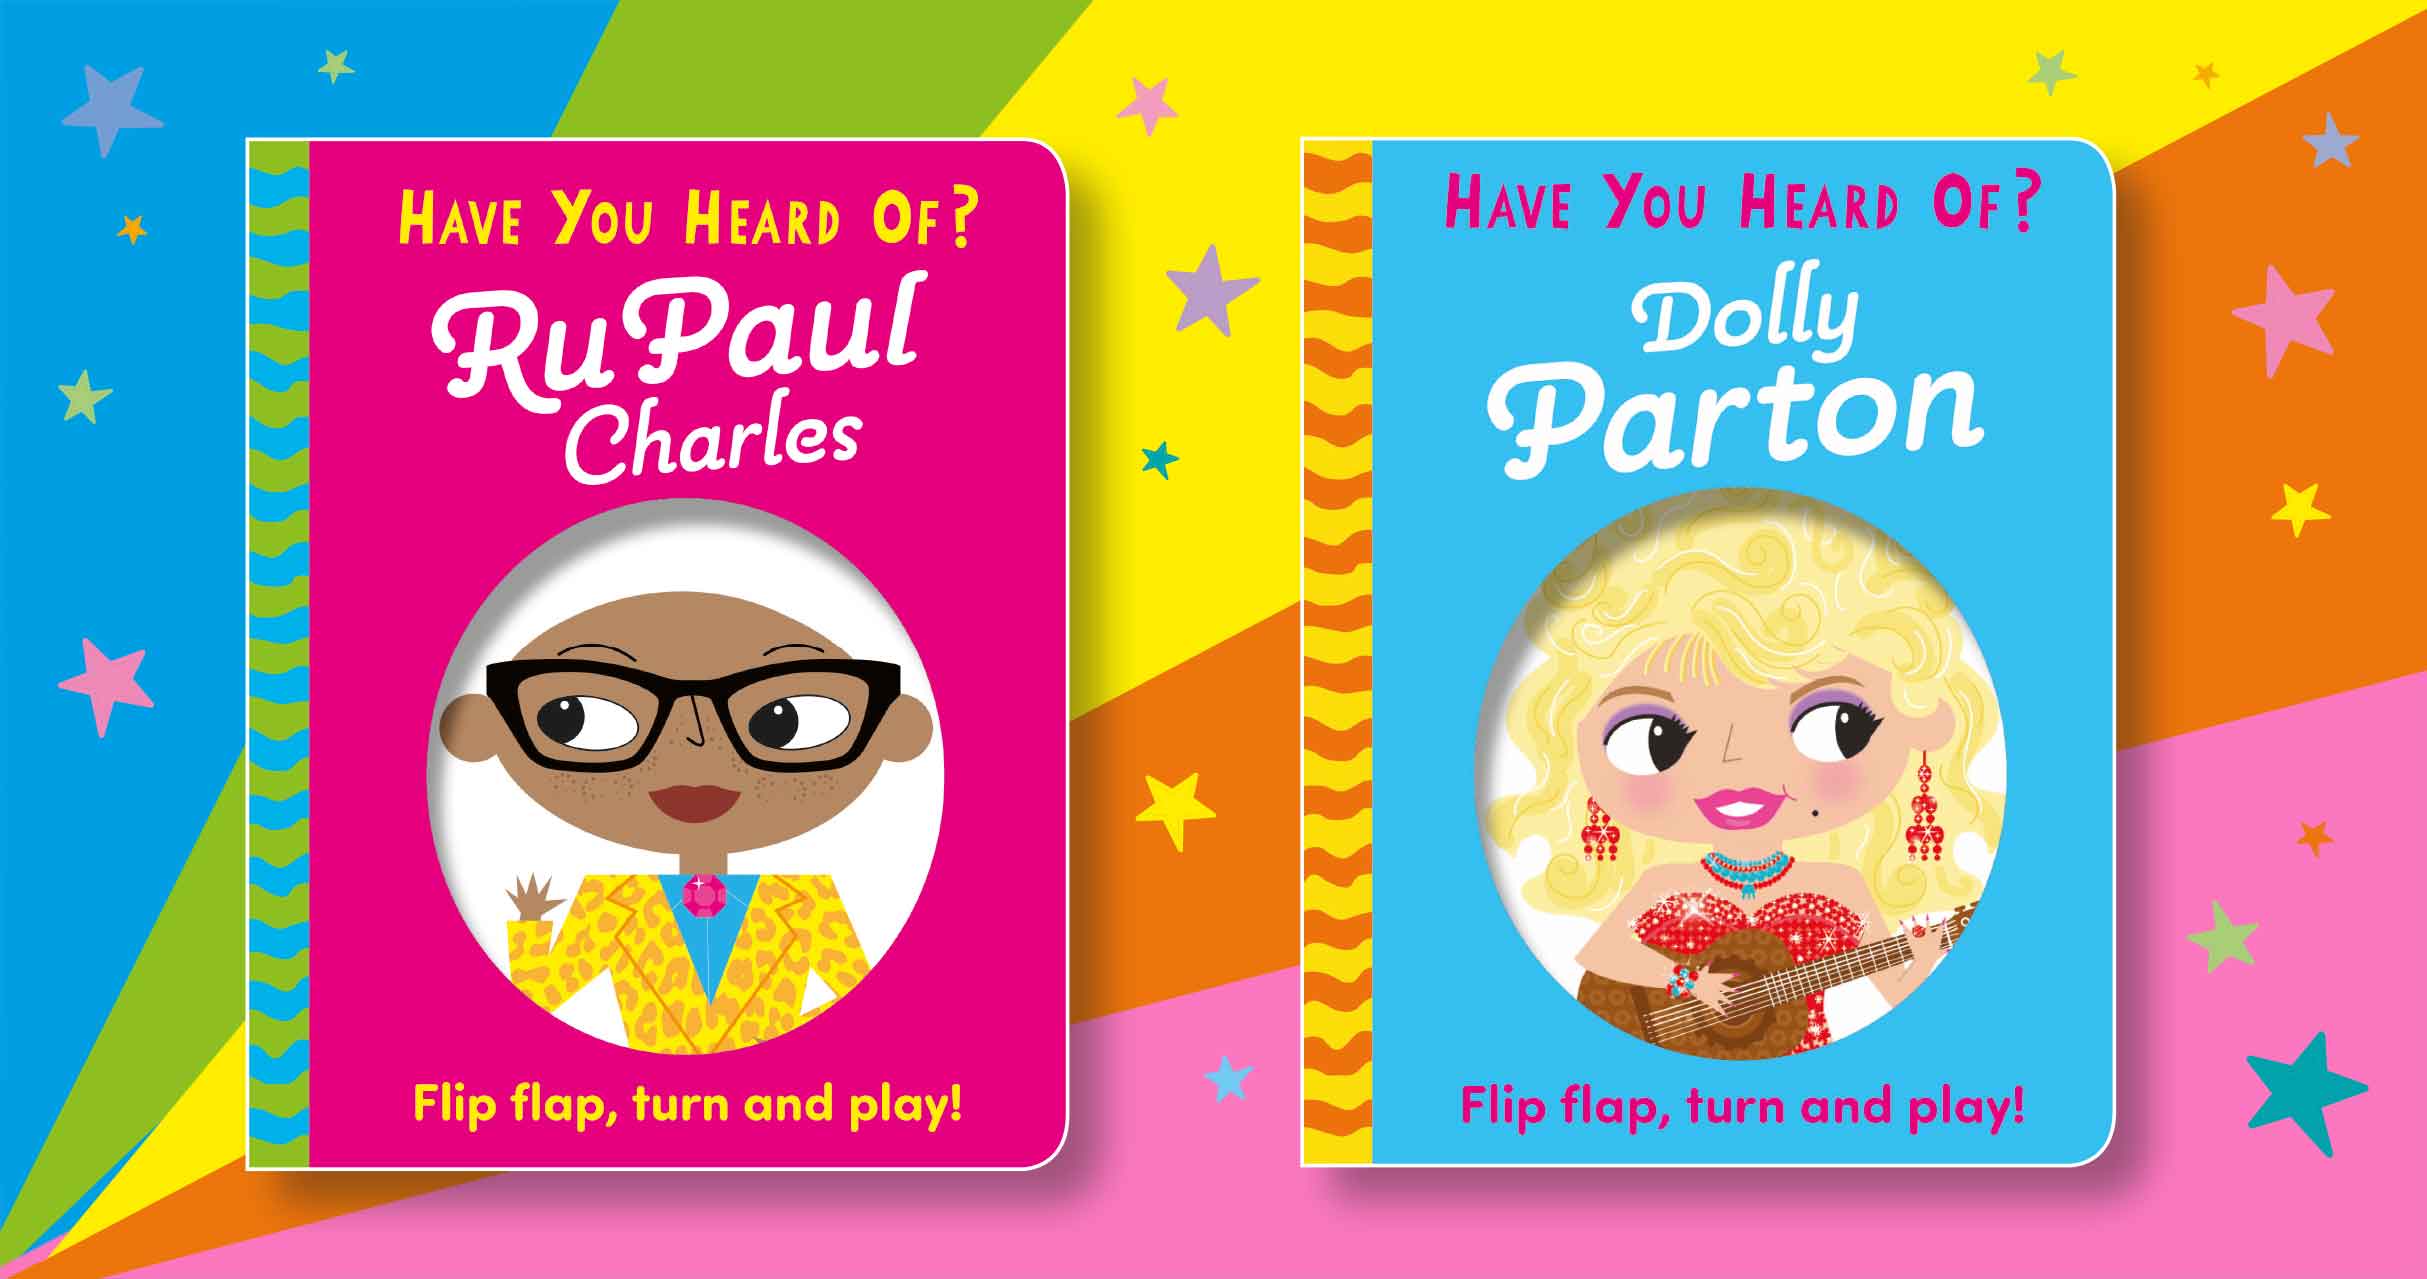 have you heard of Dolly Parton RuPaul Charles